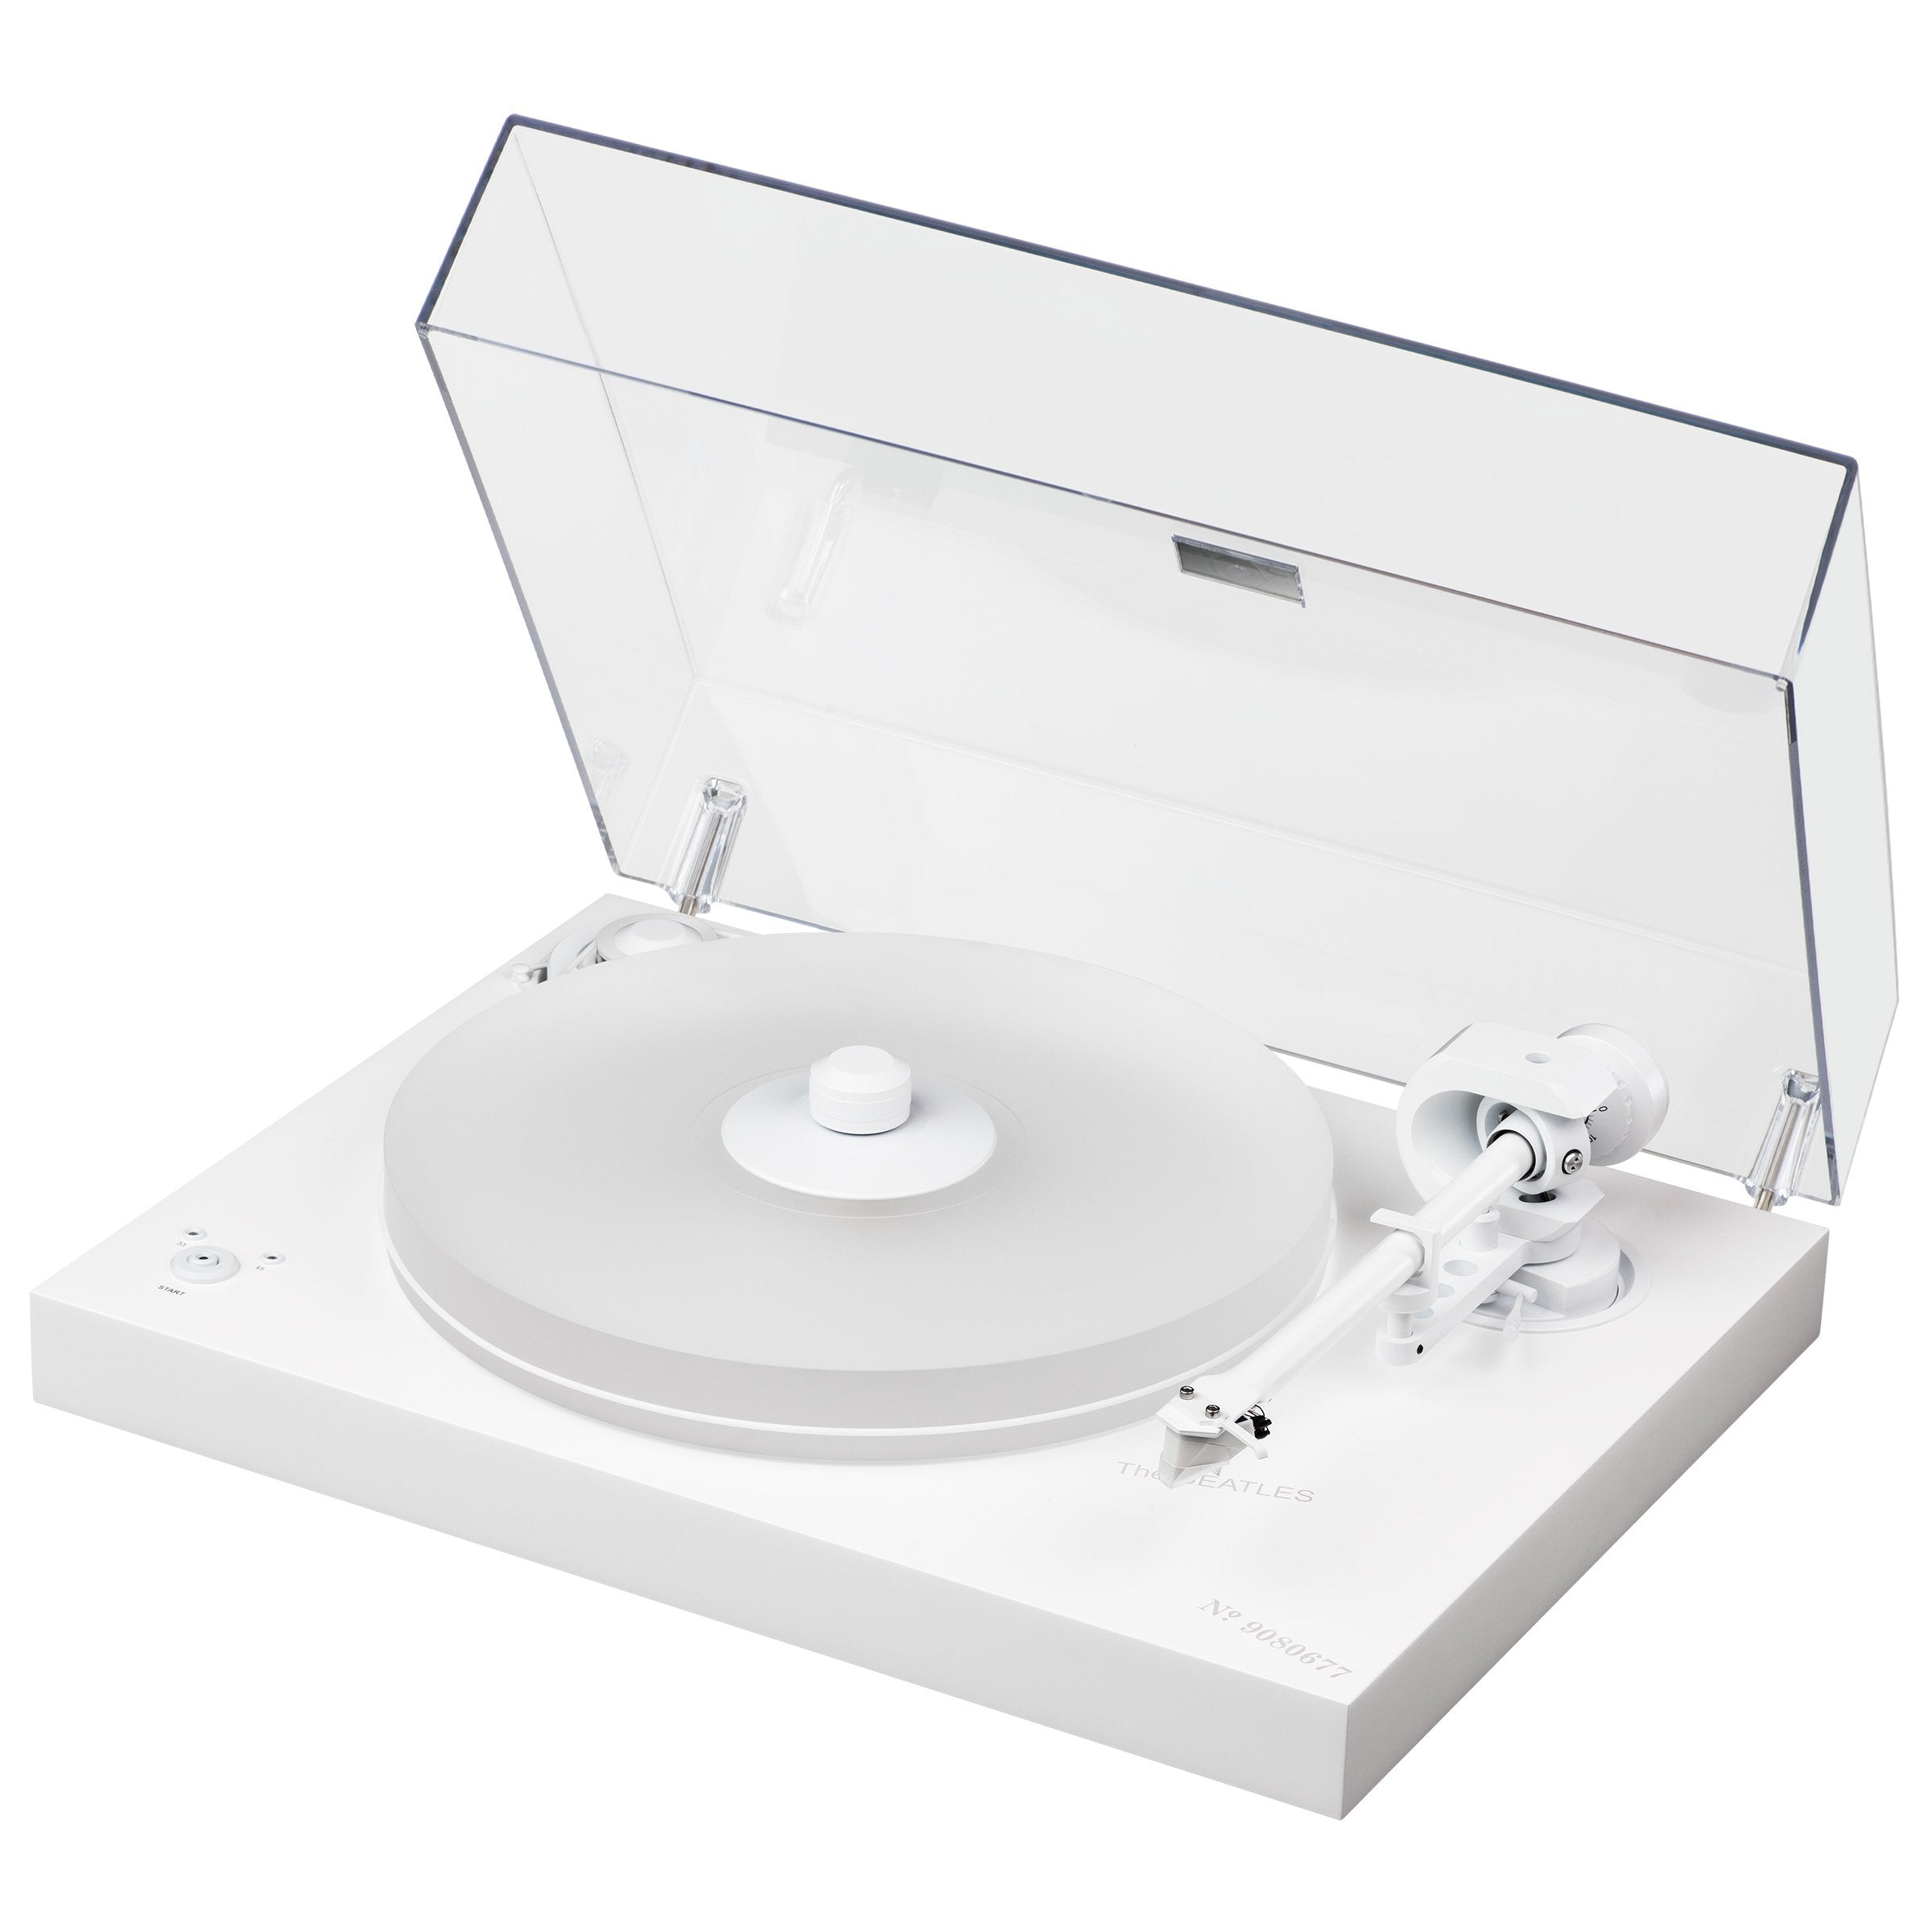 Pro-Ject: 2Xperience SB Turntable - The Beatles White Album Edition